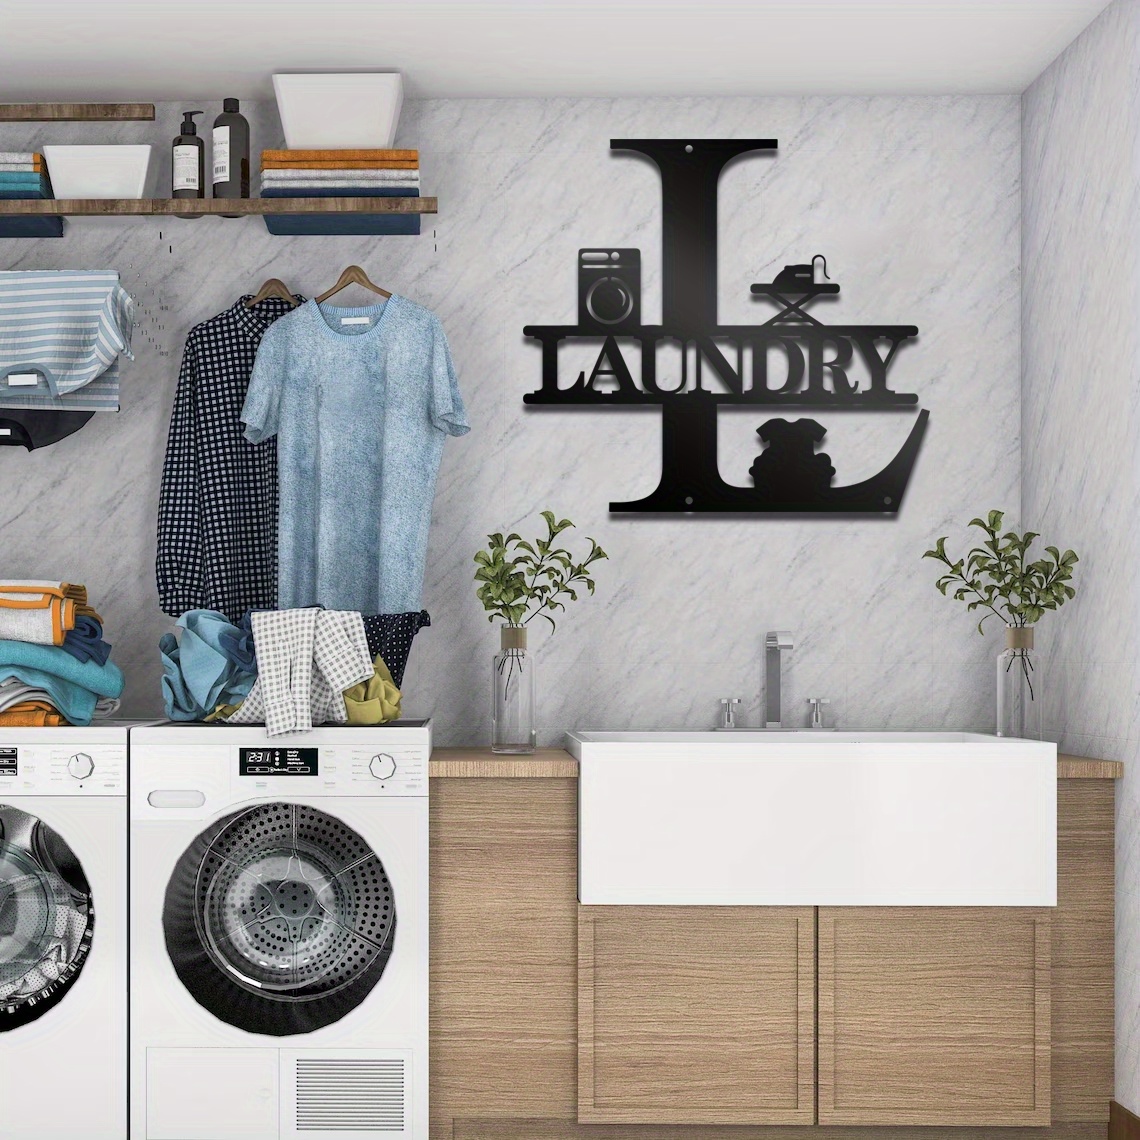 

1pc, Laundry Room, Wall Decor, Metal Laundry Sign For Modern Home Decorations, Laundry Room Decor, Black Metal Wall Art